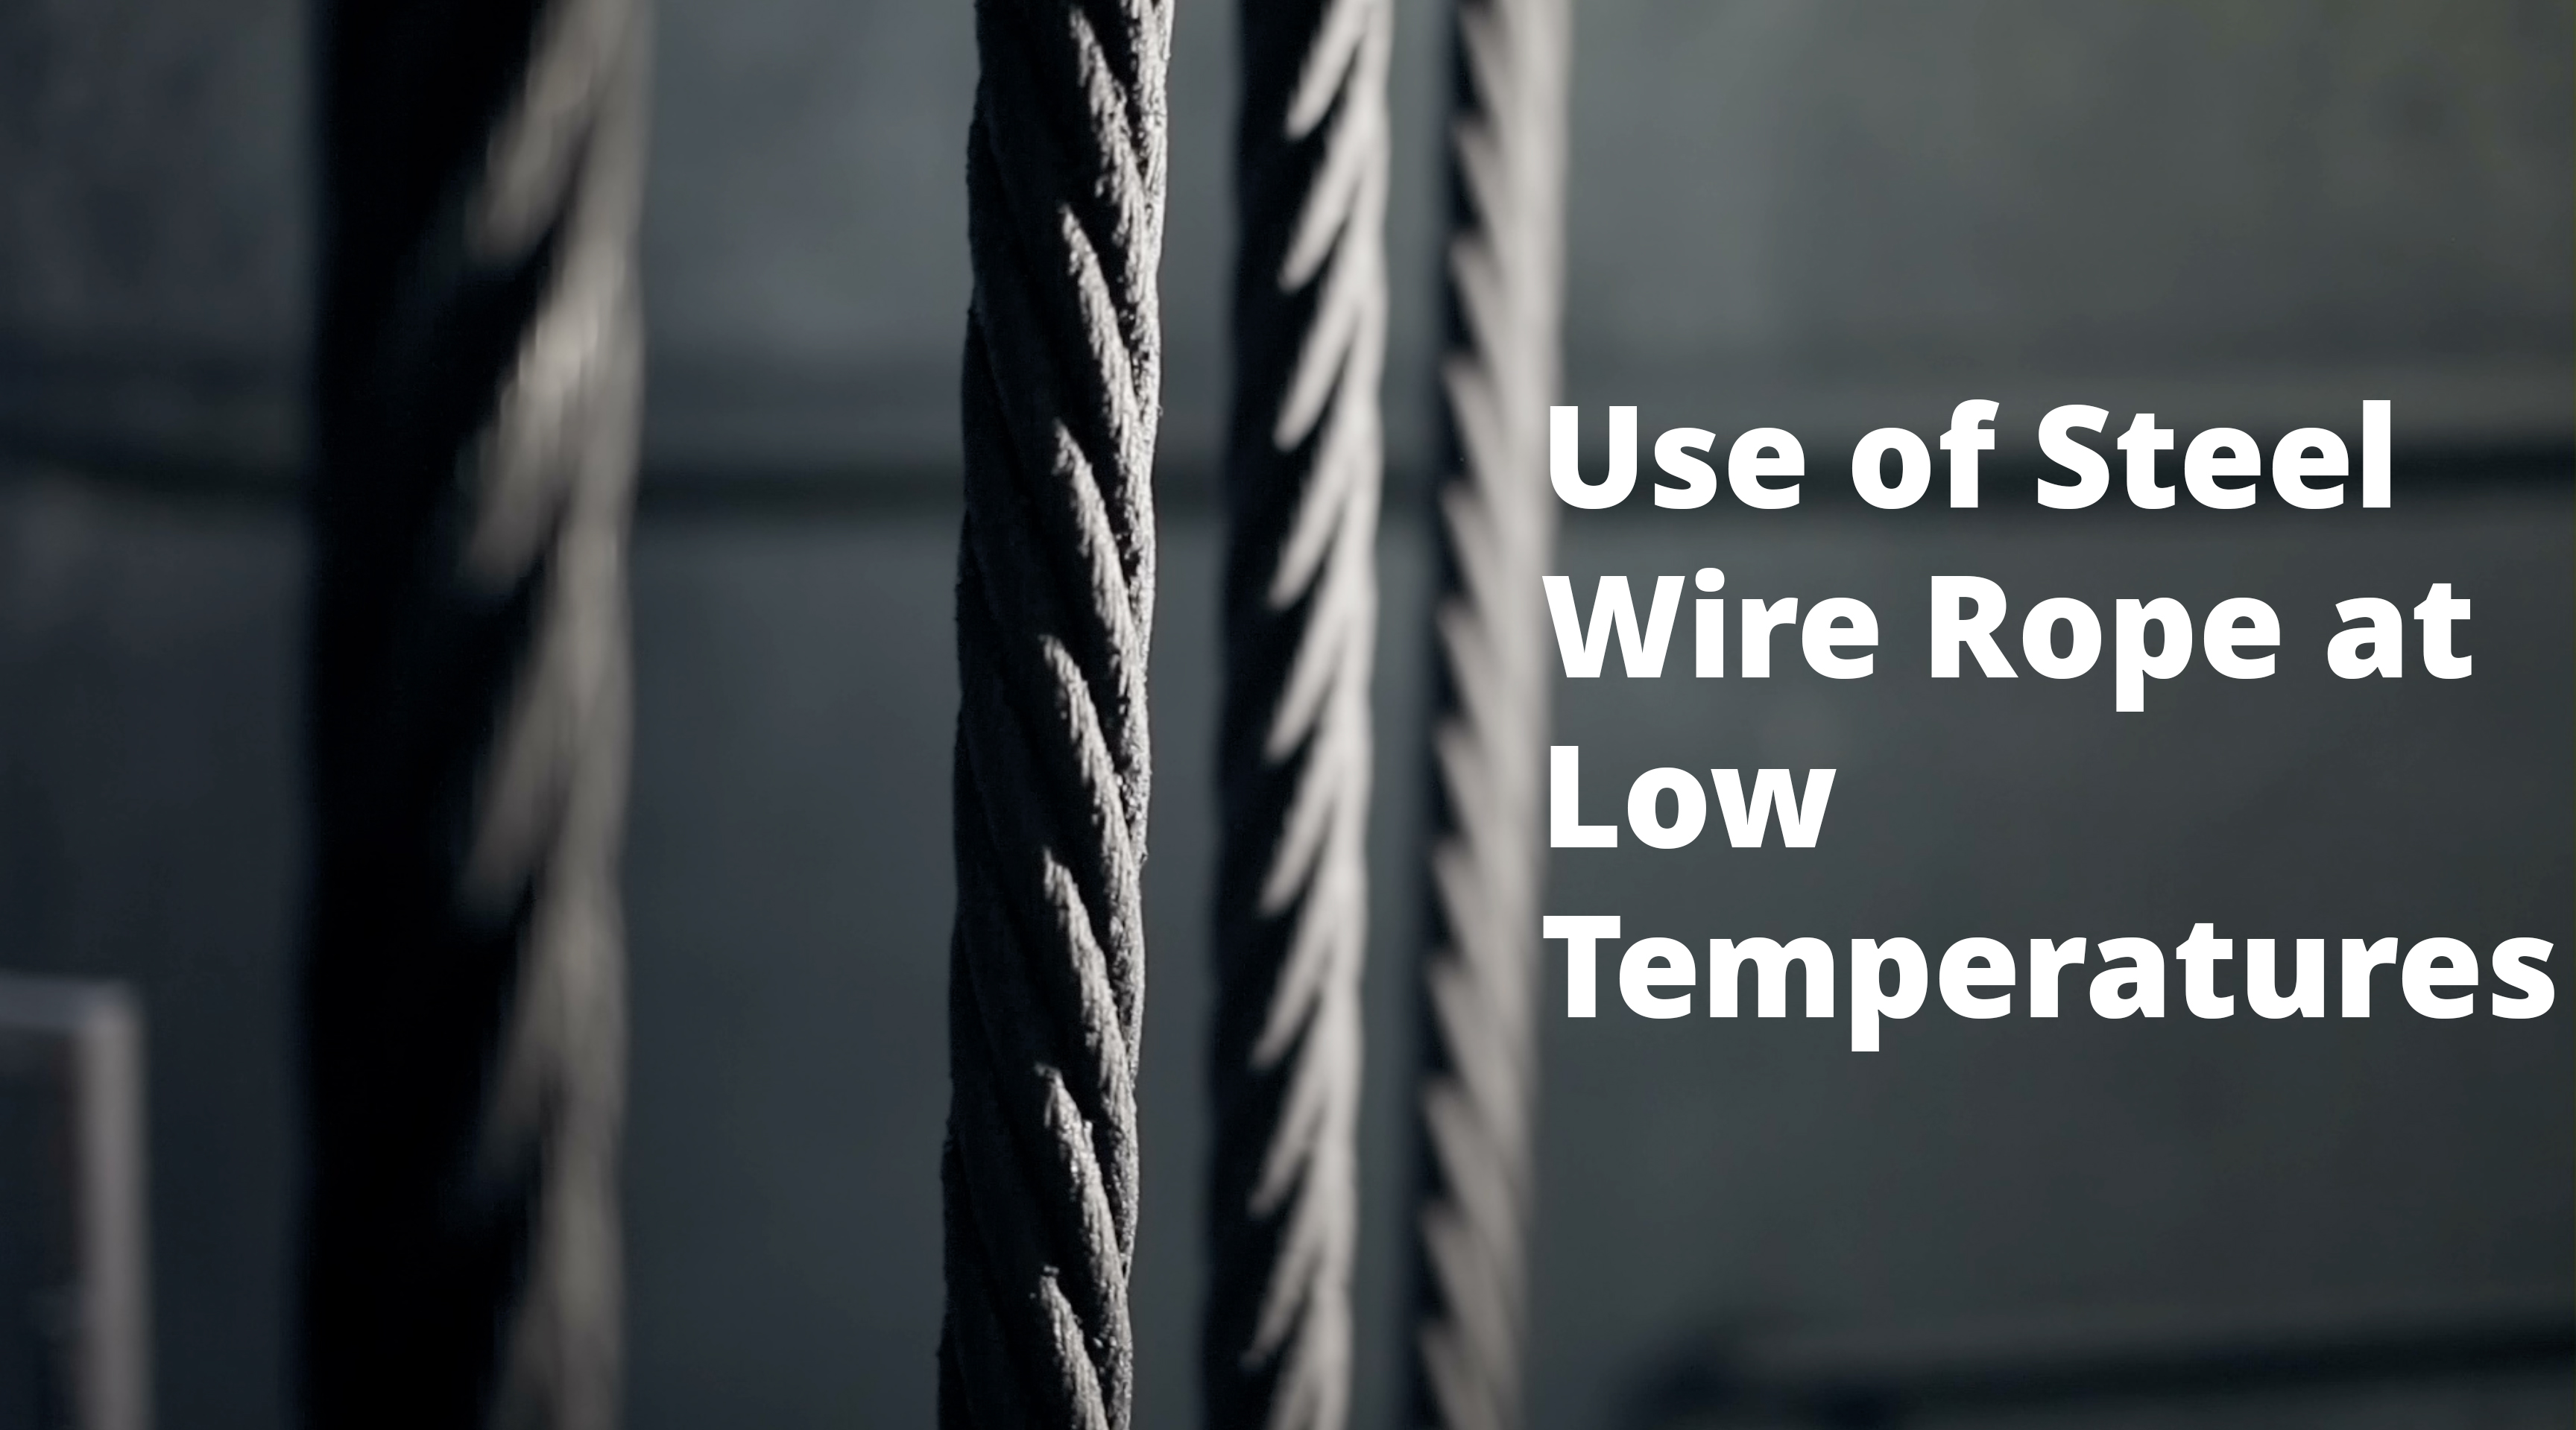 Thumbnail image for the podcast "Use of steel wire rope at low temperature" featuring an image of steel wire rope & text containing the podcast title.